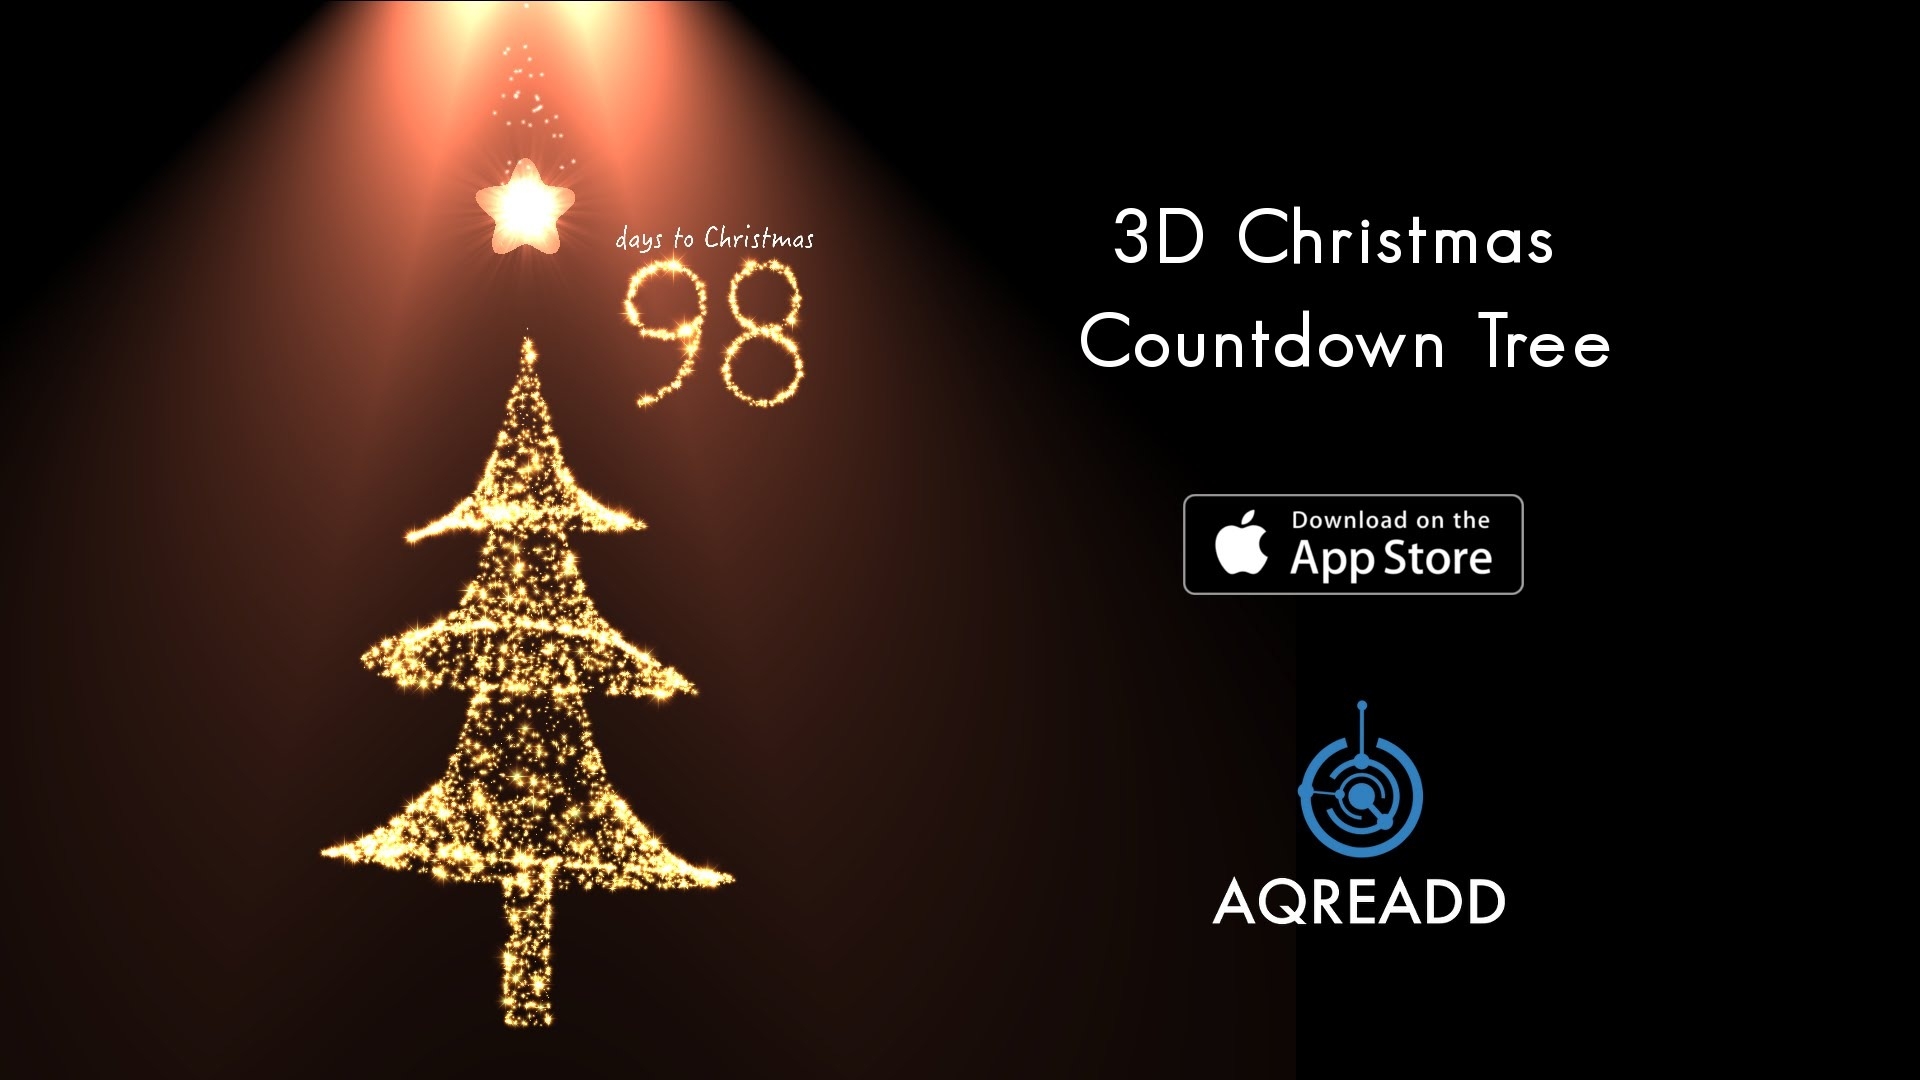 3d Christmas Countdown Tree For Iphone 6, Iphone 6 - Countdown To Christmas Live - HD Wallpaper 